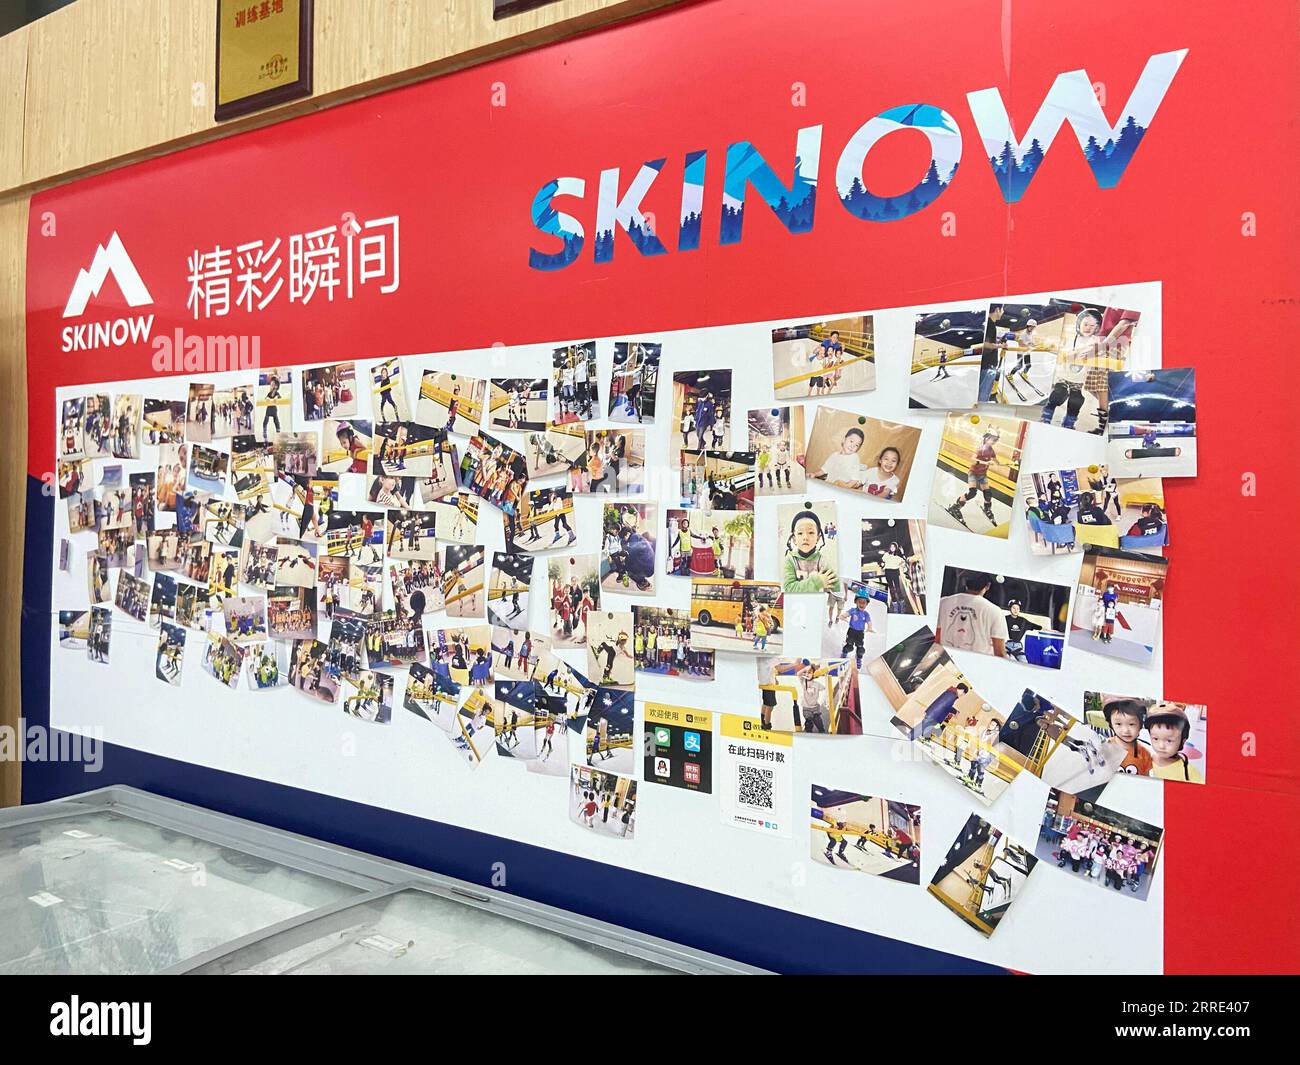 220125 -- HAIKOU, Jan. 25, 2022 -- Photos of learners are seen on a wall of an indoor skiing training field Skinow in Haikou, capital of south China s Hainan Province, Jan. 15, 2022. The Beijing 2022 Olympic Winter Games are scheduled from Feb. 4 to 20, followed by the Paralympics, and have stirred up passion for winter sports in China. Even people in China s warm areas, such as Hainan, have started participating in ice-snow sports. TO GO WITH China Focus: Passion for winter sports heats up on tropical island  CHINA-HAINAN-HAIKOU-WINTER SPORTS-HEAT CN ChenxZiwei PUBLICATIONxNOTxINxCHN Stock Photo